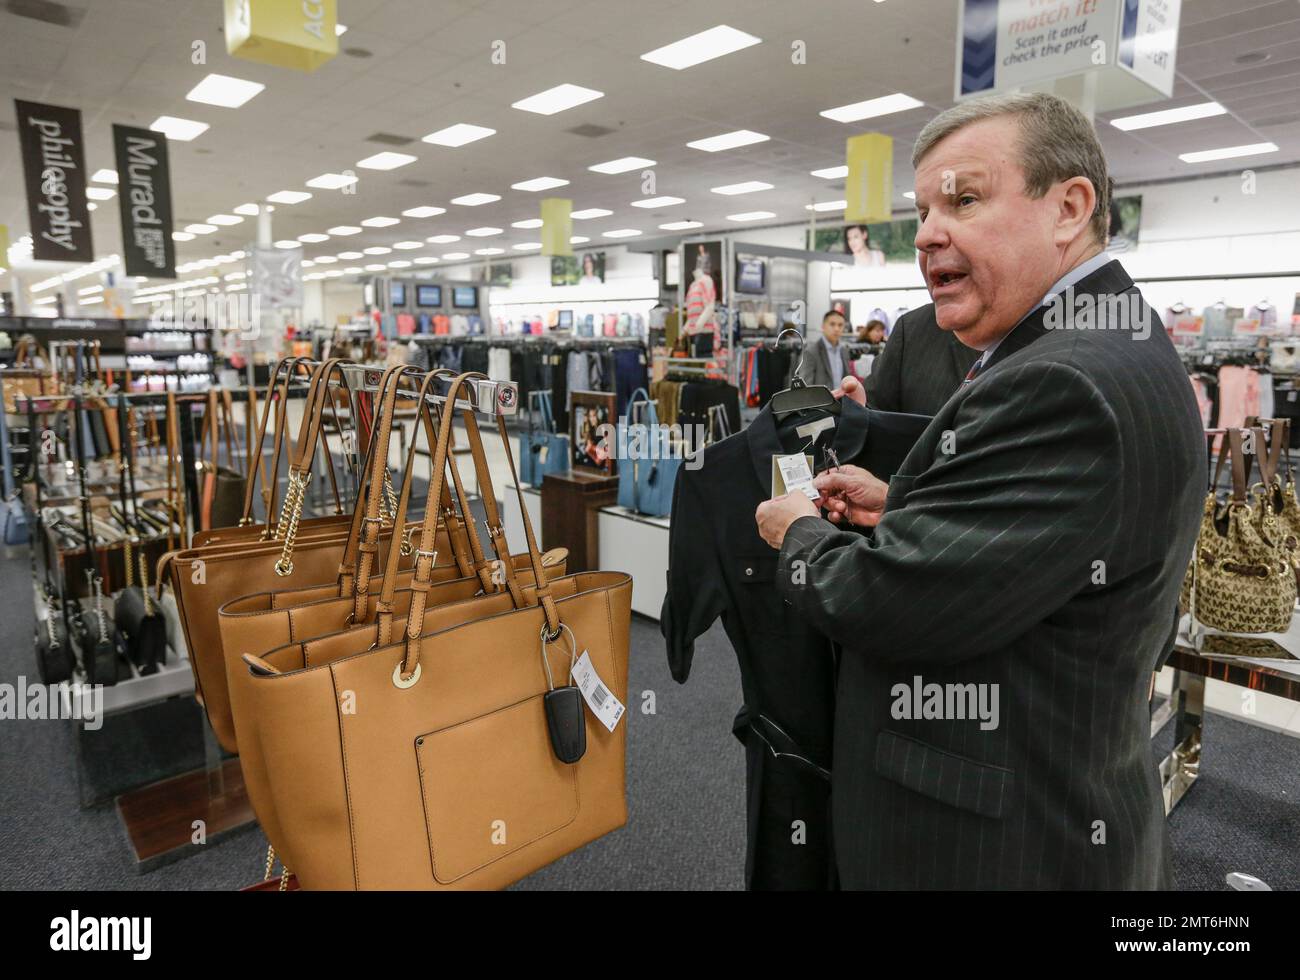 In this May 24, 2017, photo, Tom Shull, CEO of the Army & Air Force Exchange  Service, checks a price tag at a store inside the Exchange, at Offutt Air  Force Base